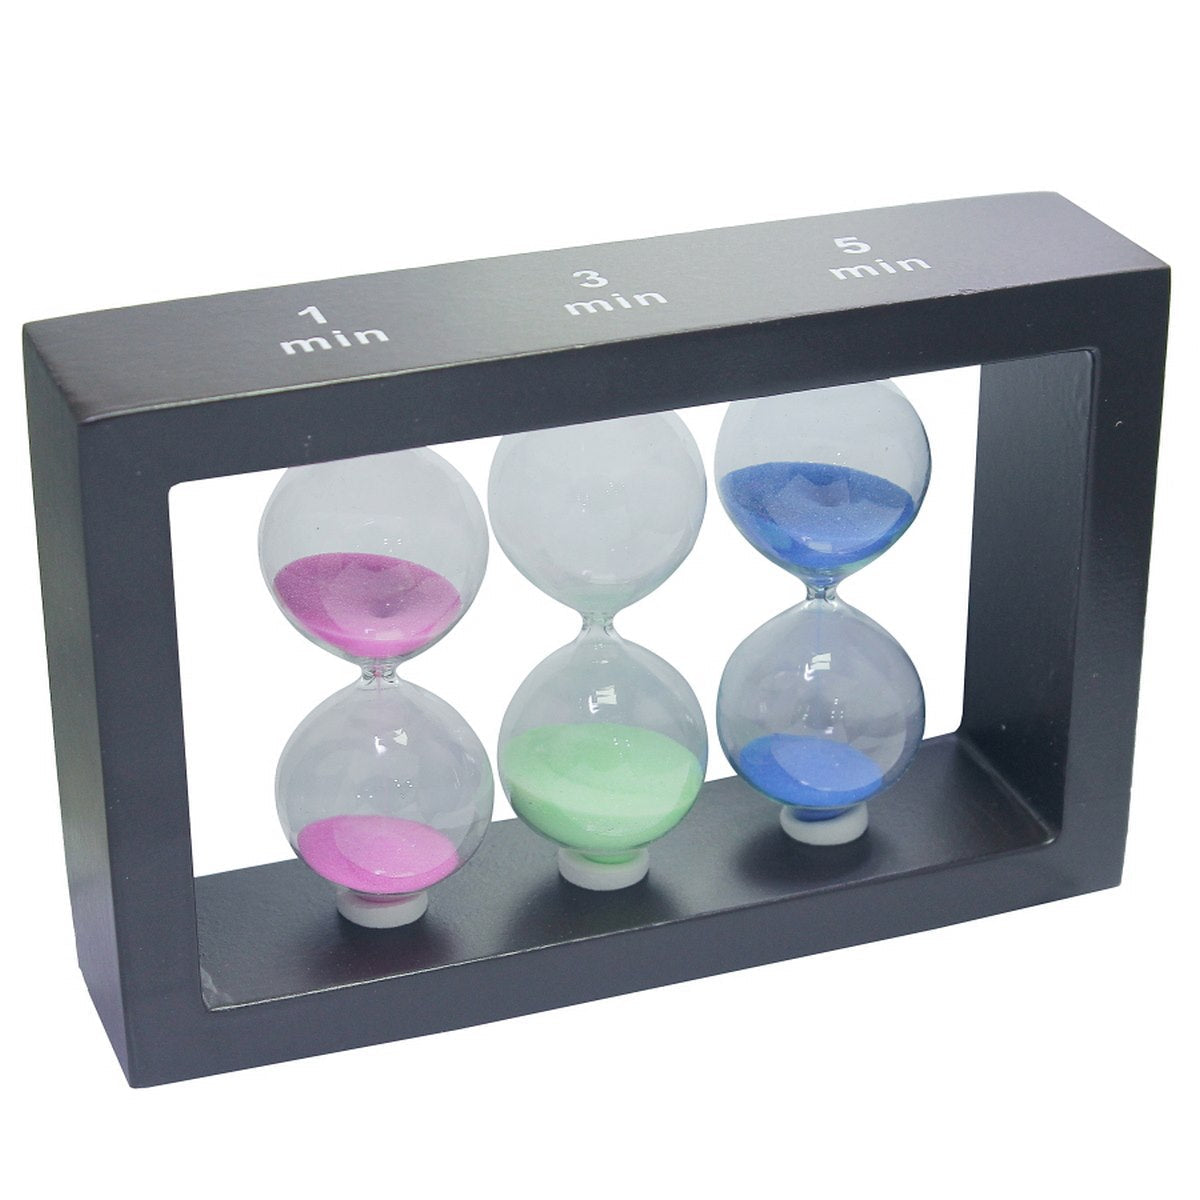 jags-mumbai Sand & Clock Timers Sand Timer 3in1